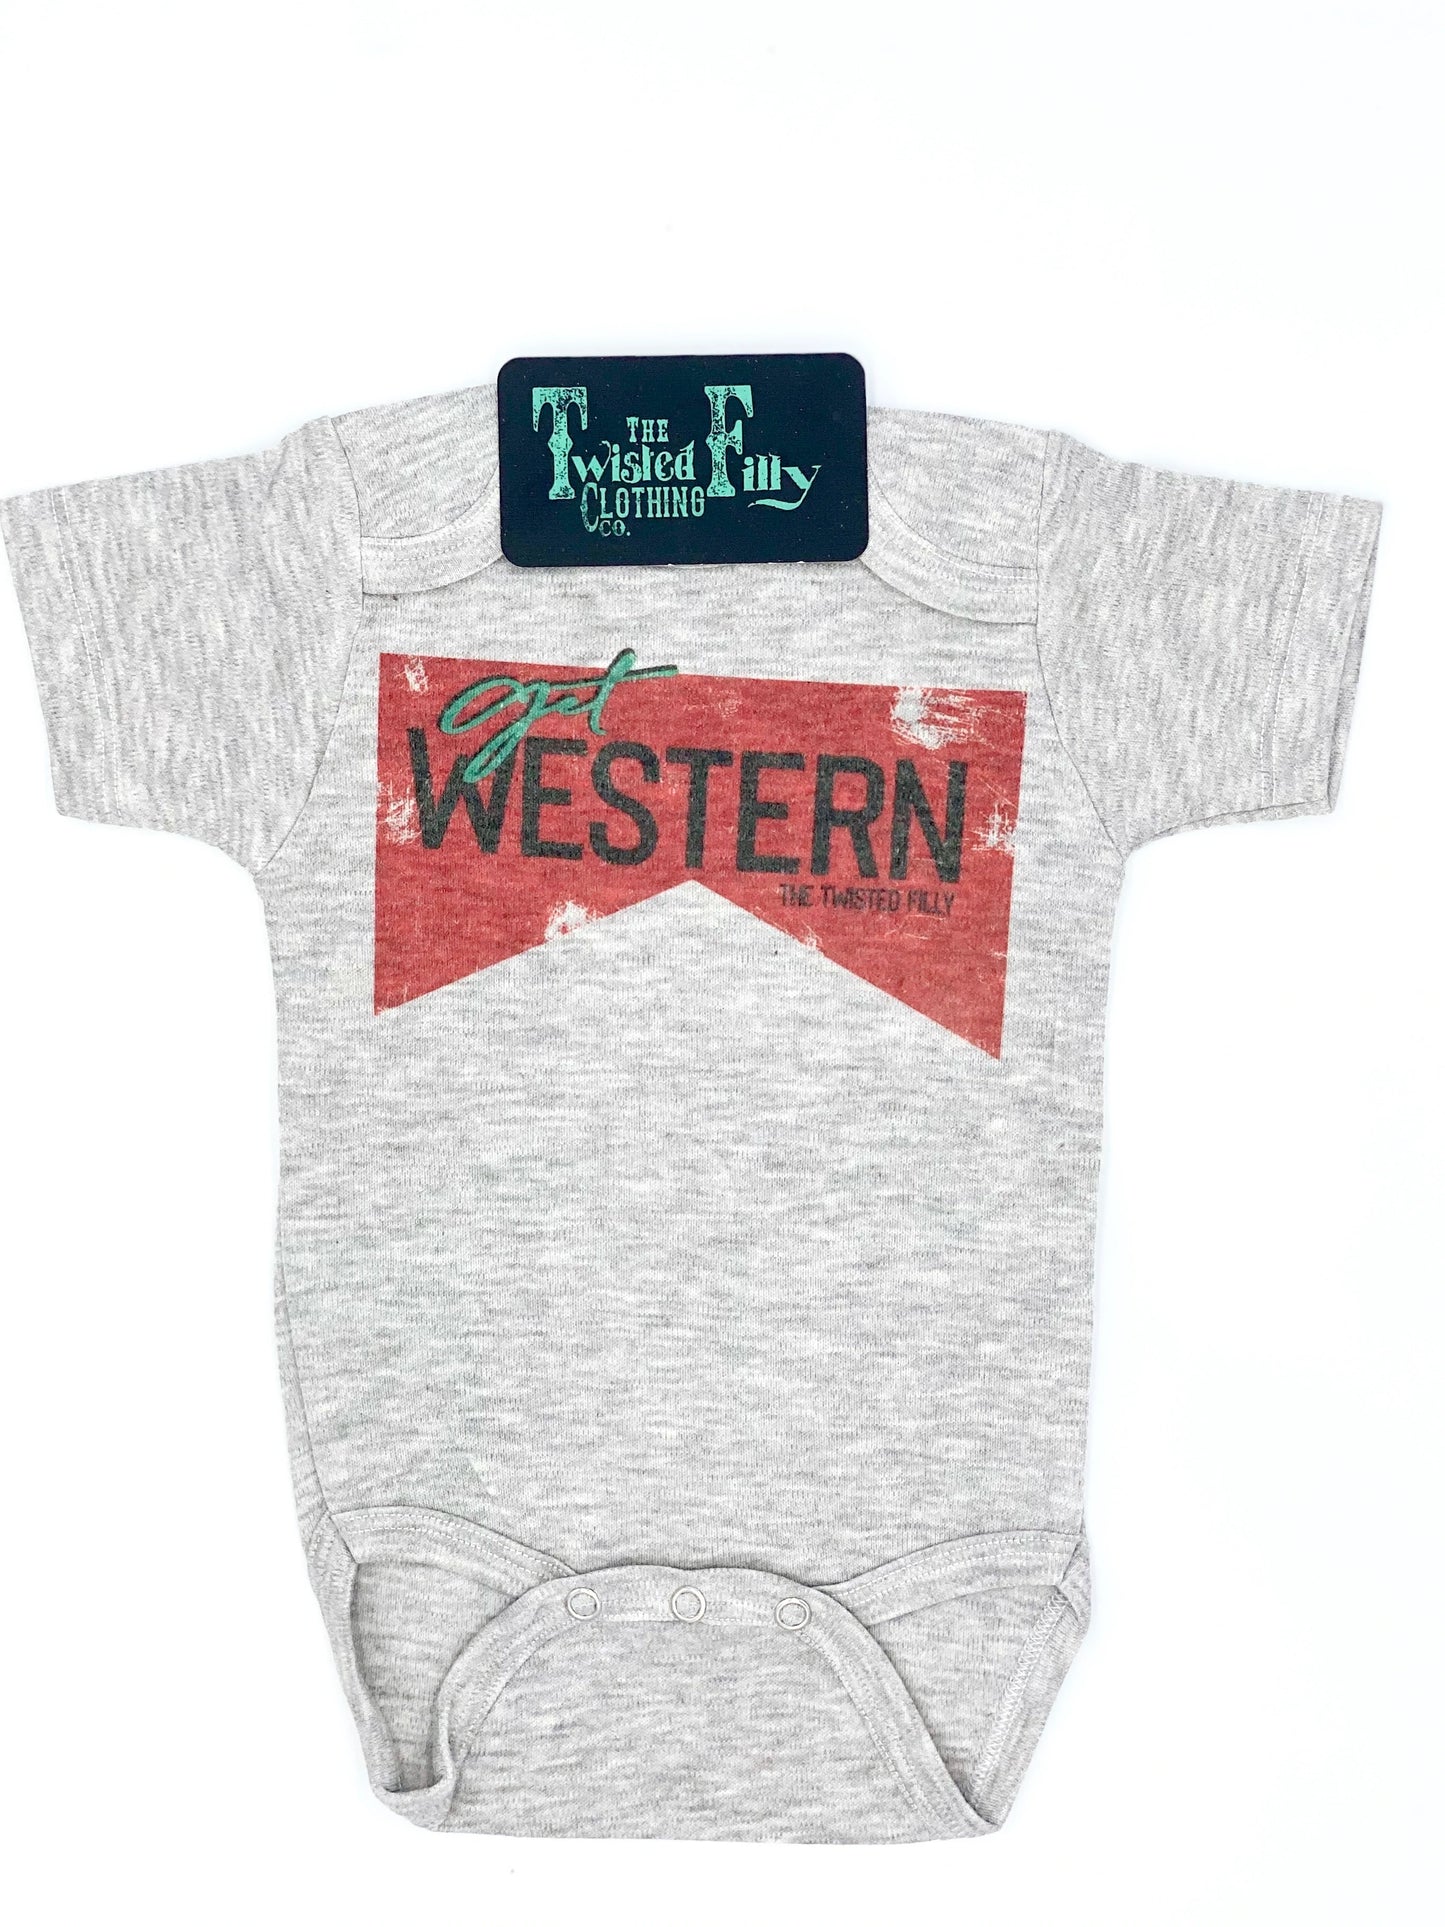 THE TWISTED FILLY CLOTHING CO. Get Western - S/S Infant One Piece - Grey